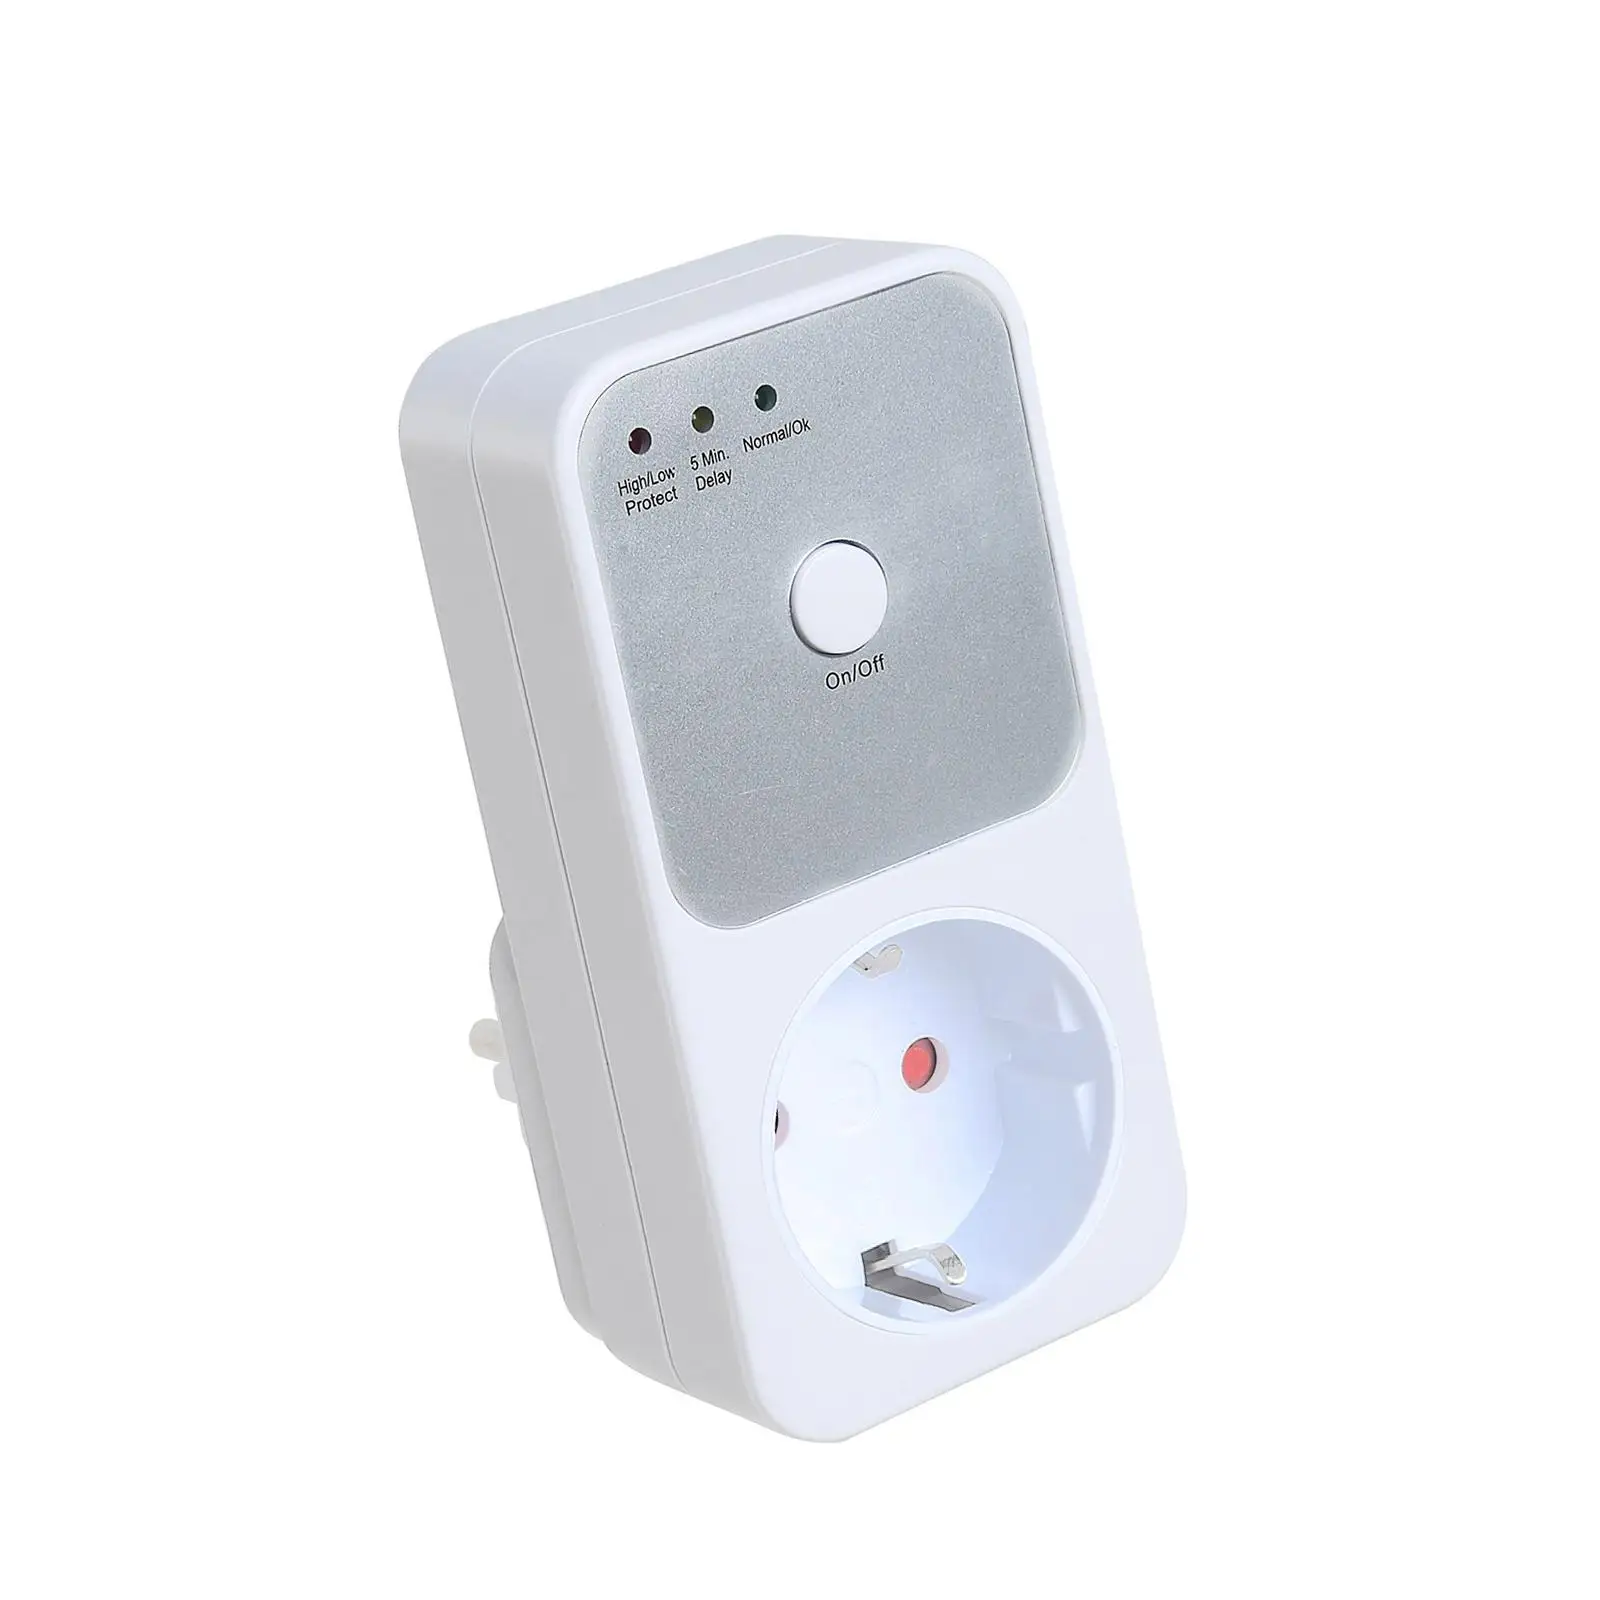 Timing Socket Conserve Socket Smart Timing Plugs Outlet Wireless Mechanical Timer Auto Shut Off for Kitchen Phone Charger Travel